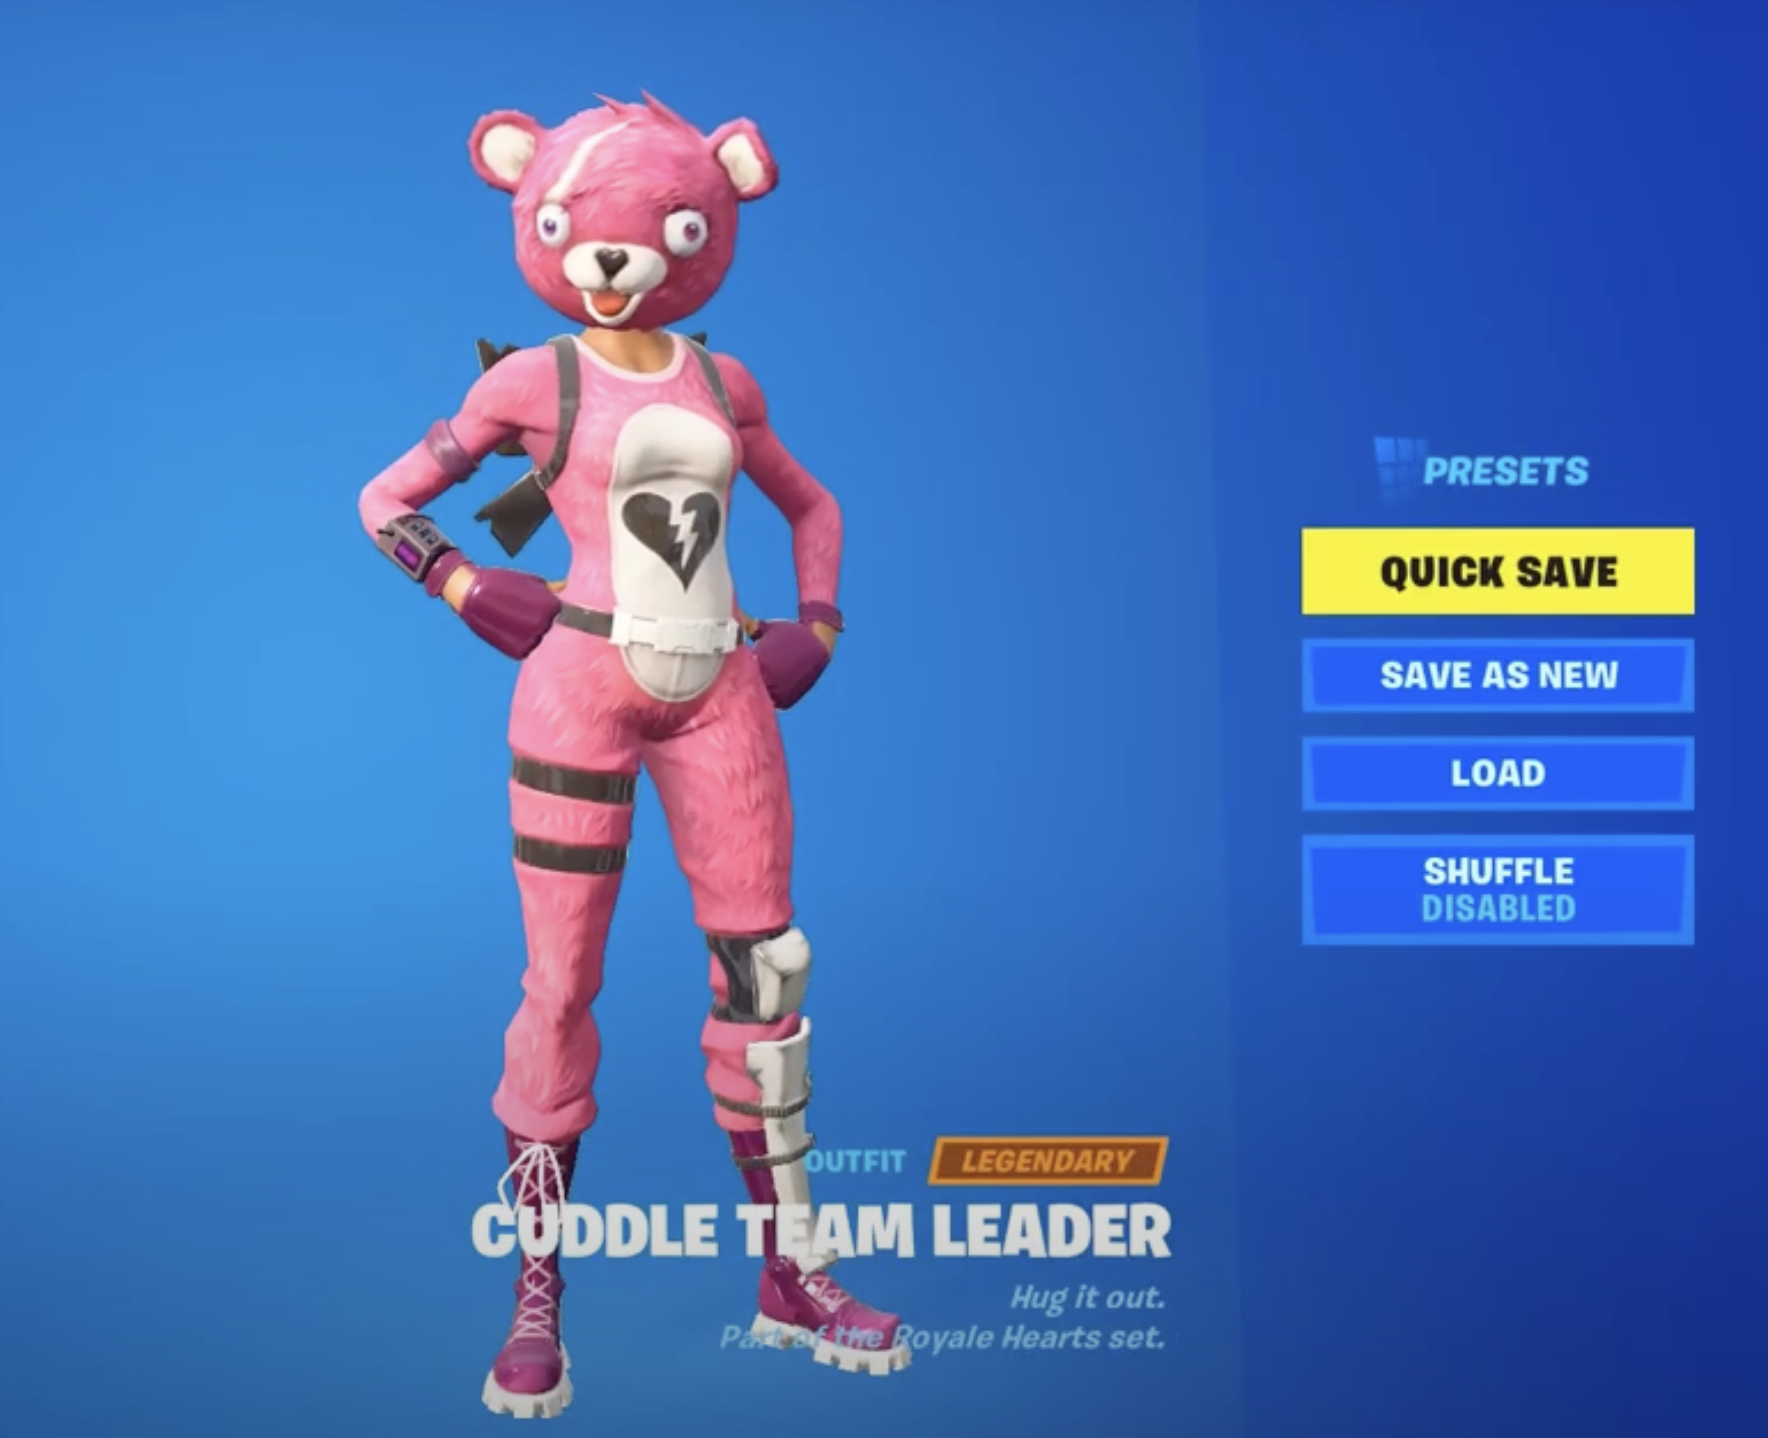 Cuddle team leader outfit in Fortnite.